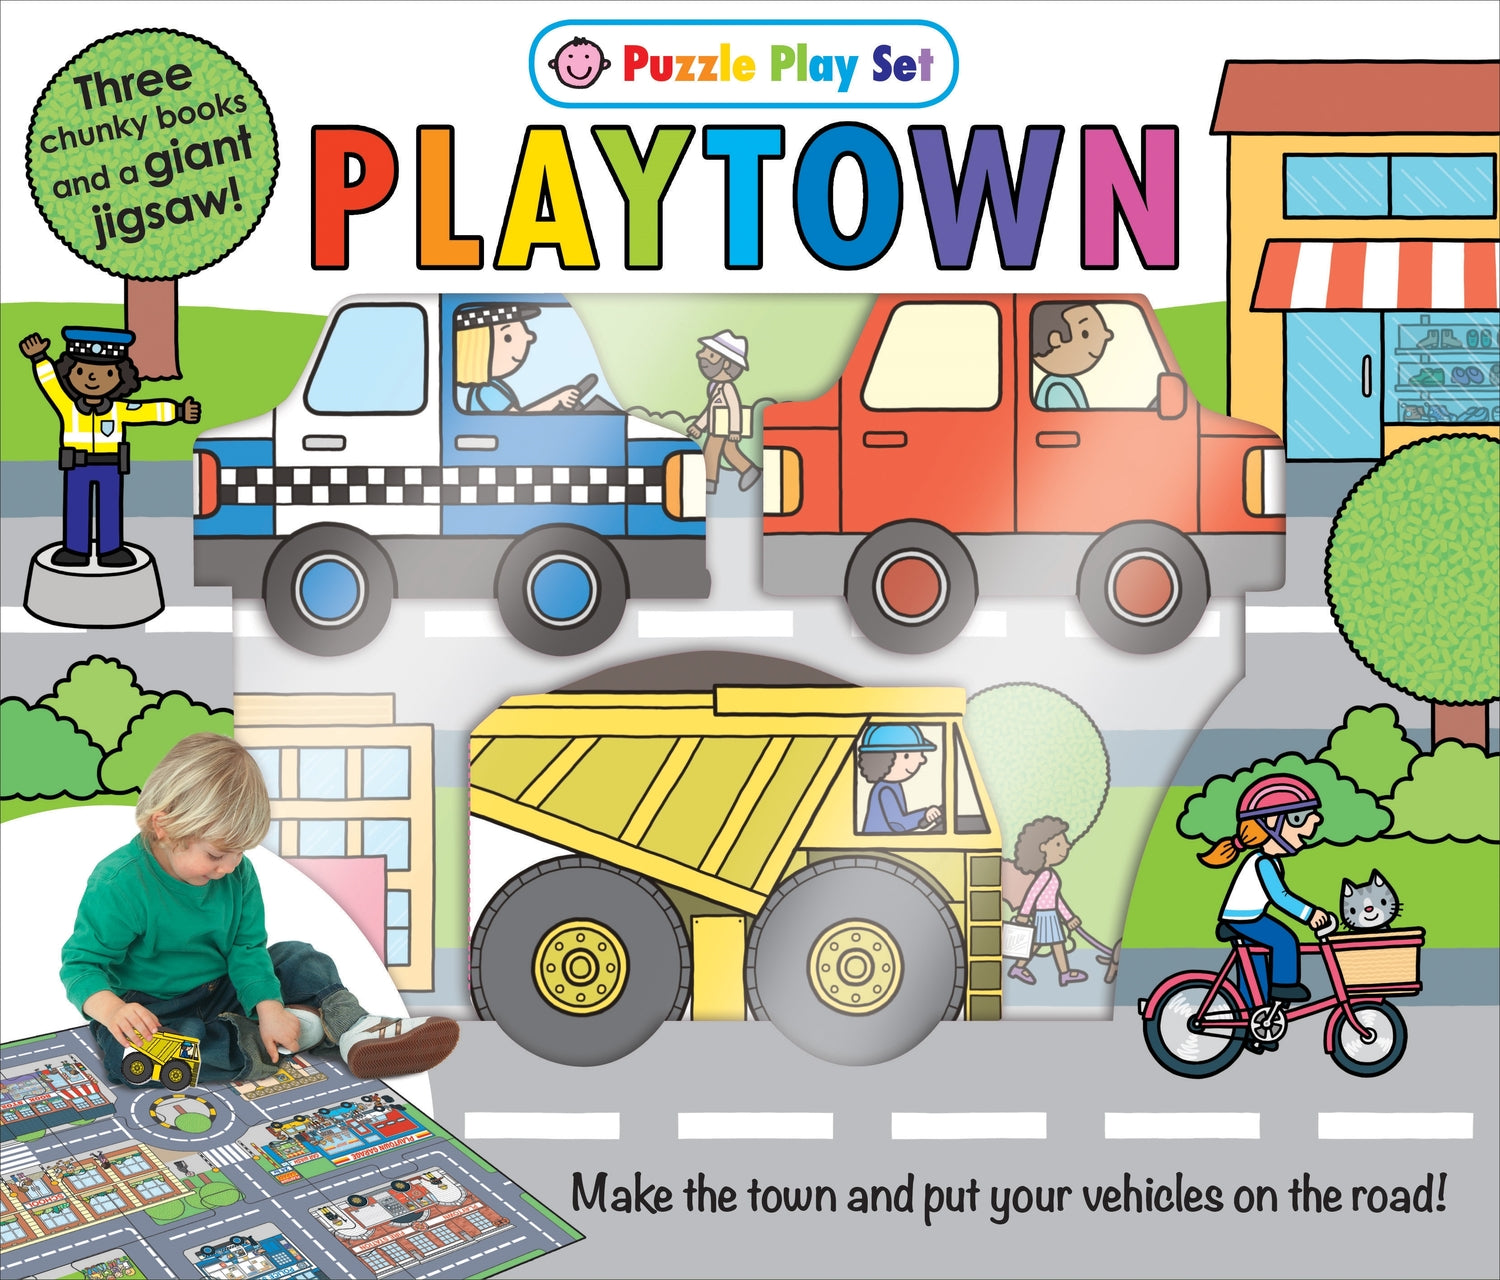 Puzzle Play Set: PLAYTOWN: Three Chunky Books and a Giant Jigsaw Puzzle!